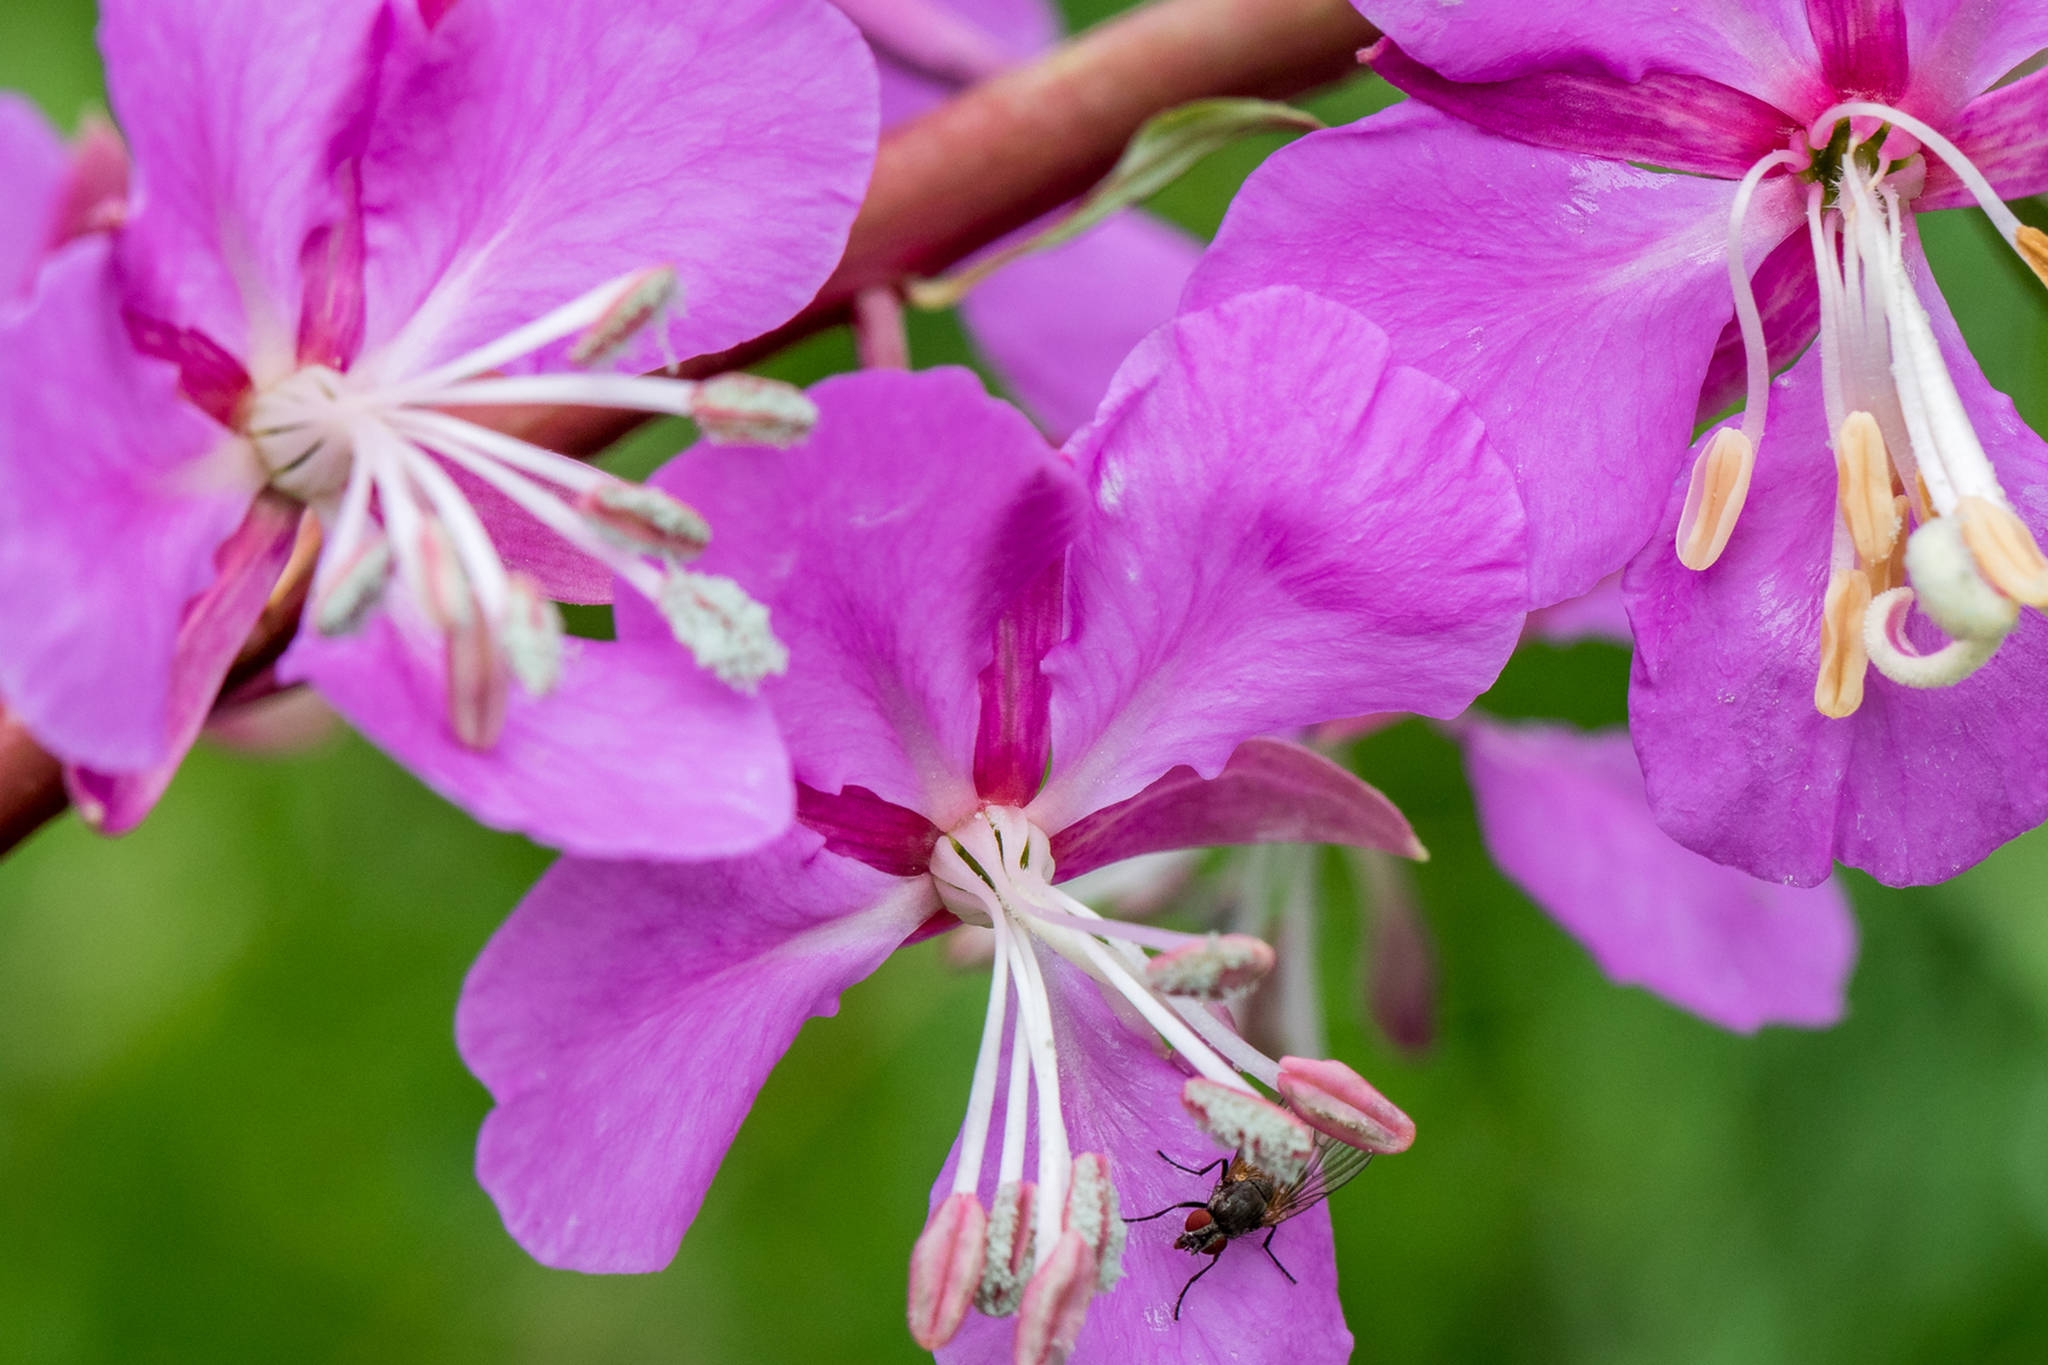 Fireweed flowers have narrow, dark pink sepals between the wide, paler-pink petals, possibly making an added attraction. (Courtesy Photo / Kerry Howard)